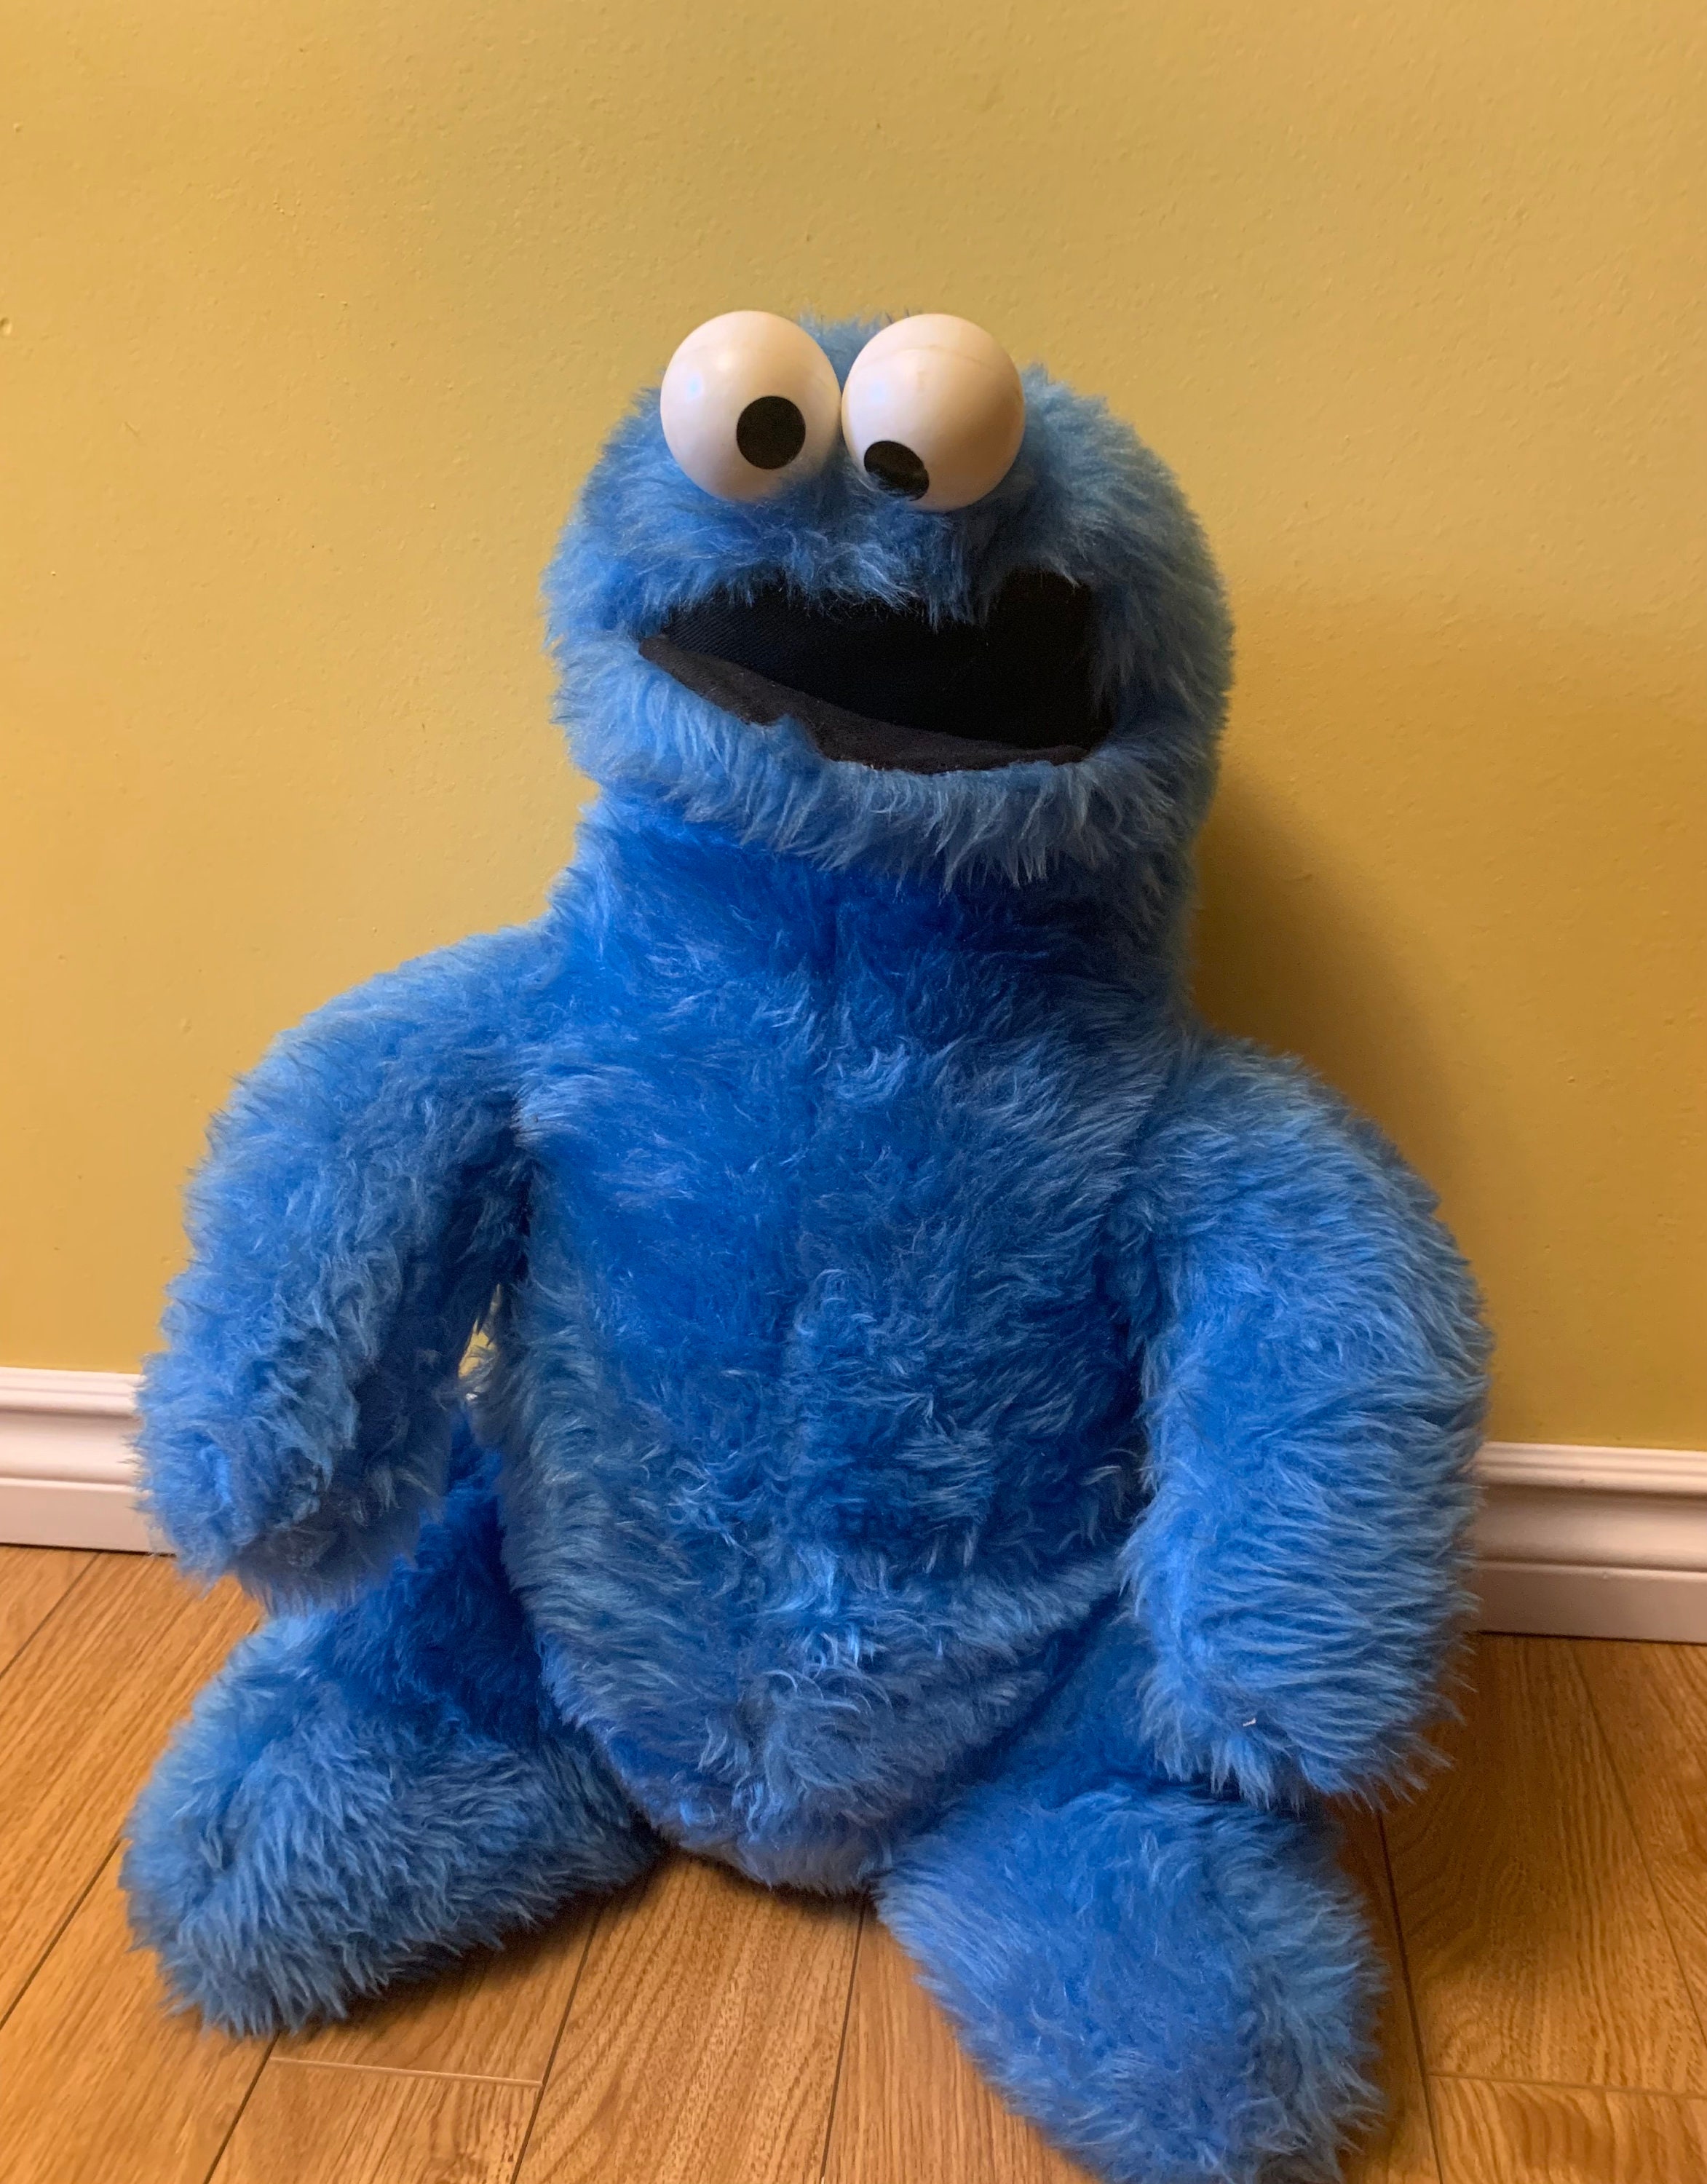 cookie monster toy